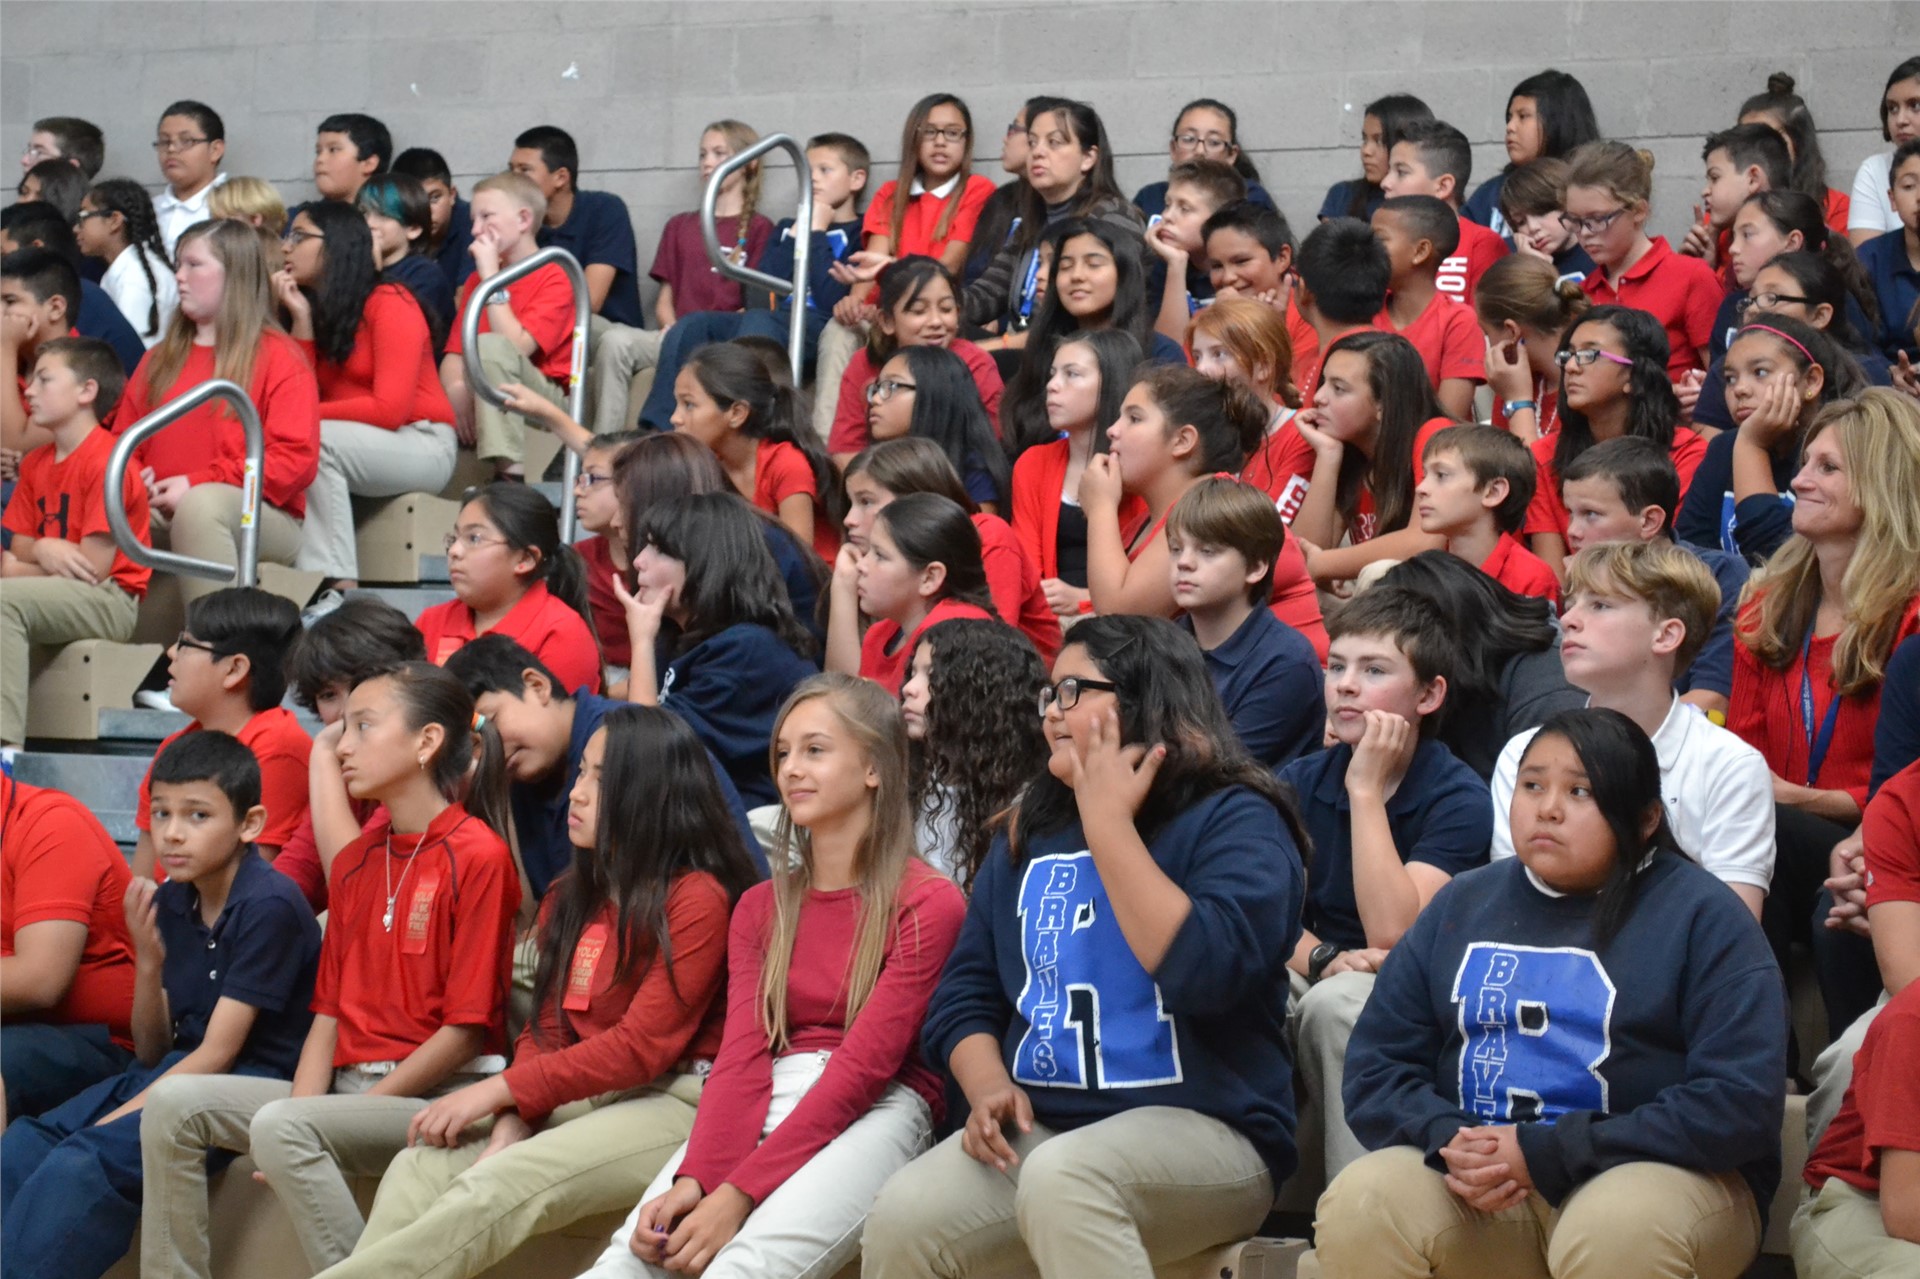 Ruidoso Middle School (RMS) Clubs and Activities: SADD